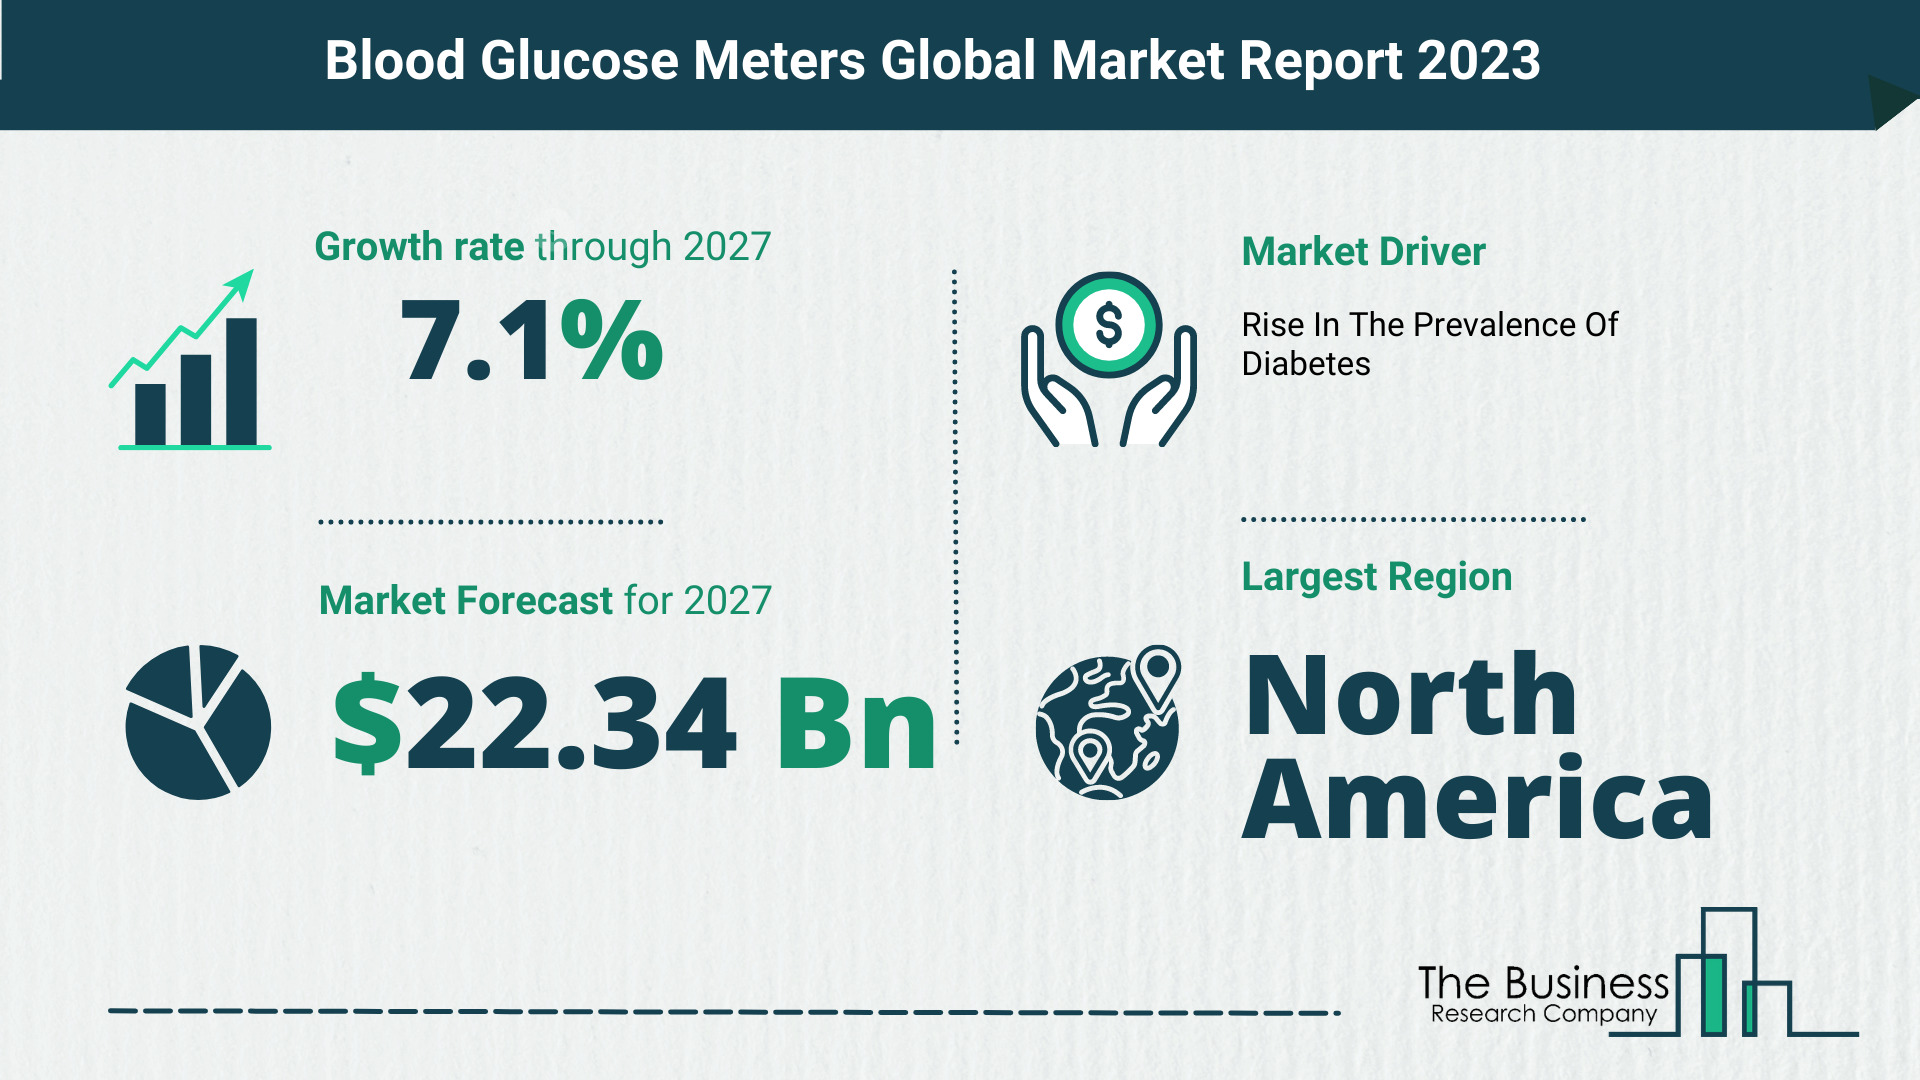 Blood Glucose Meters Market Overview: Market Size, Drivers And Trends